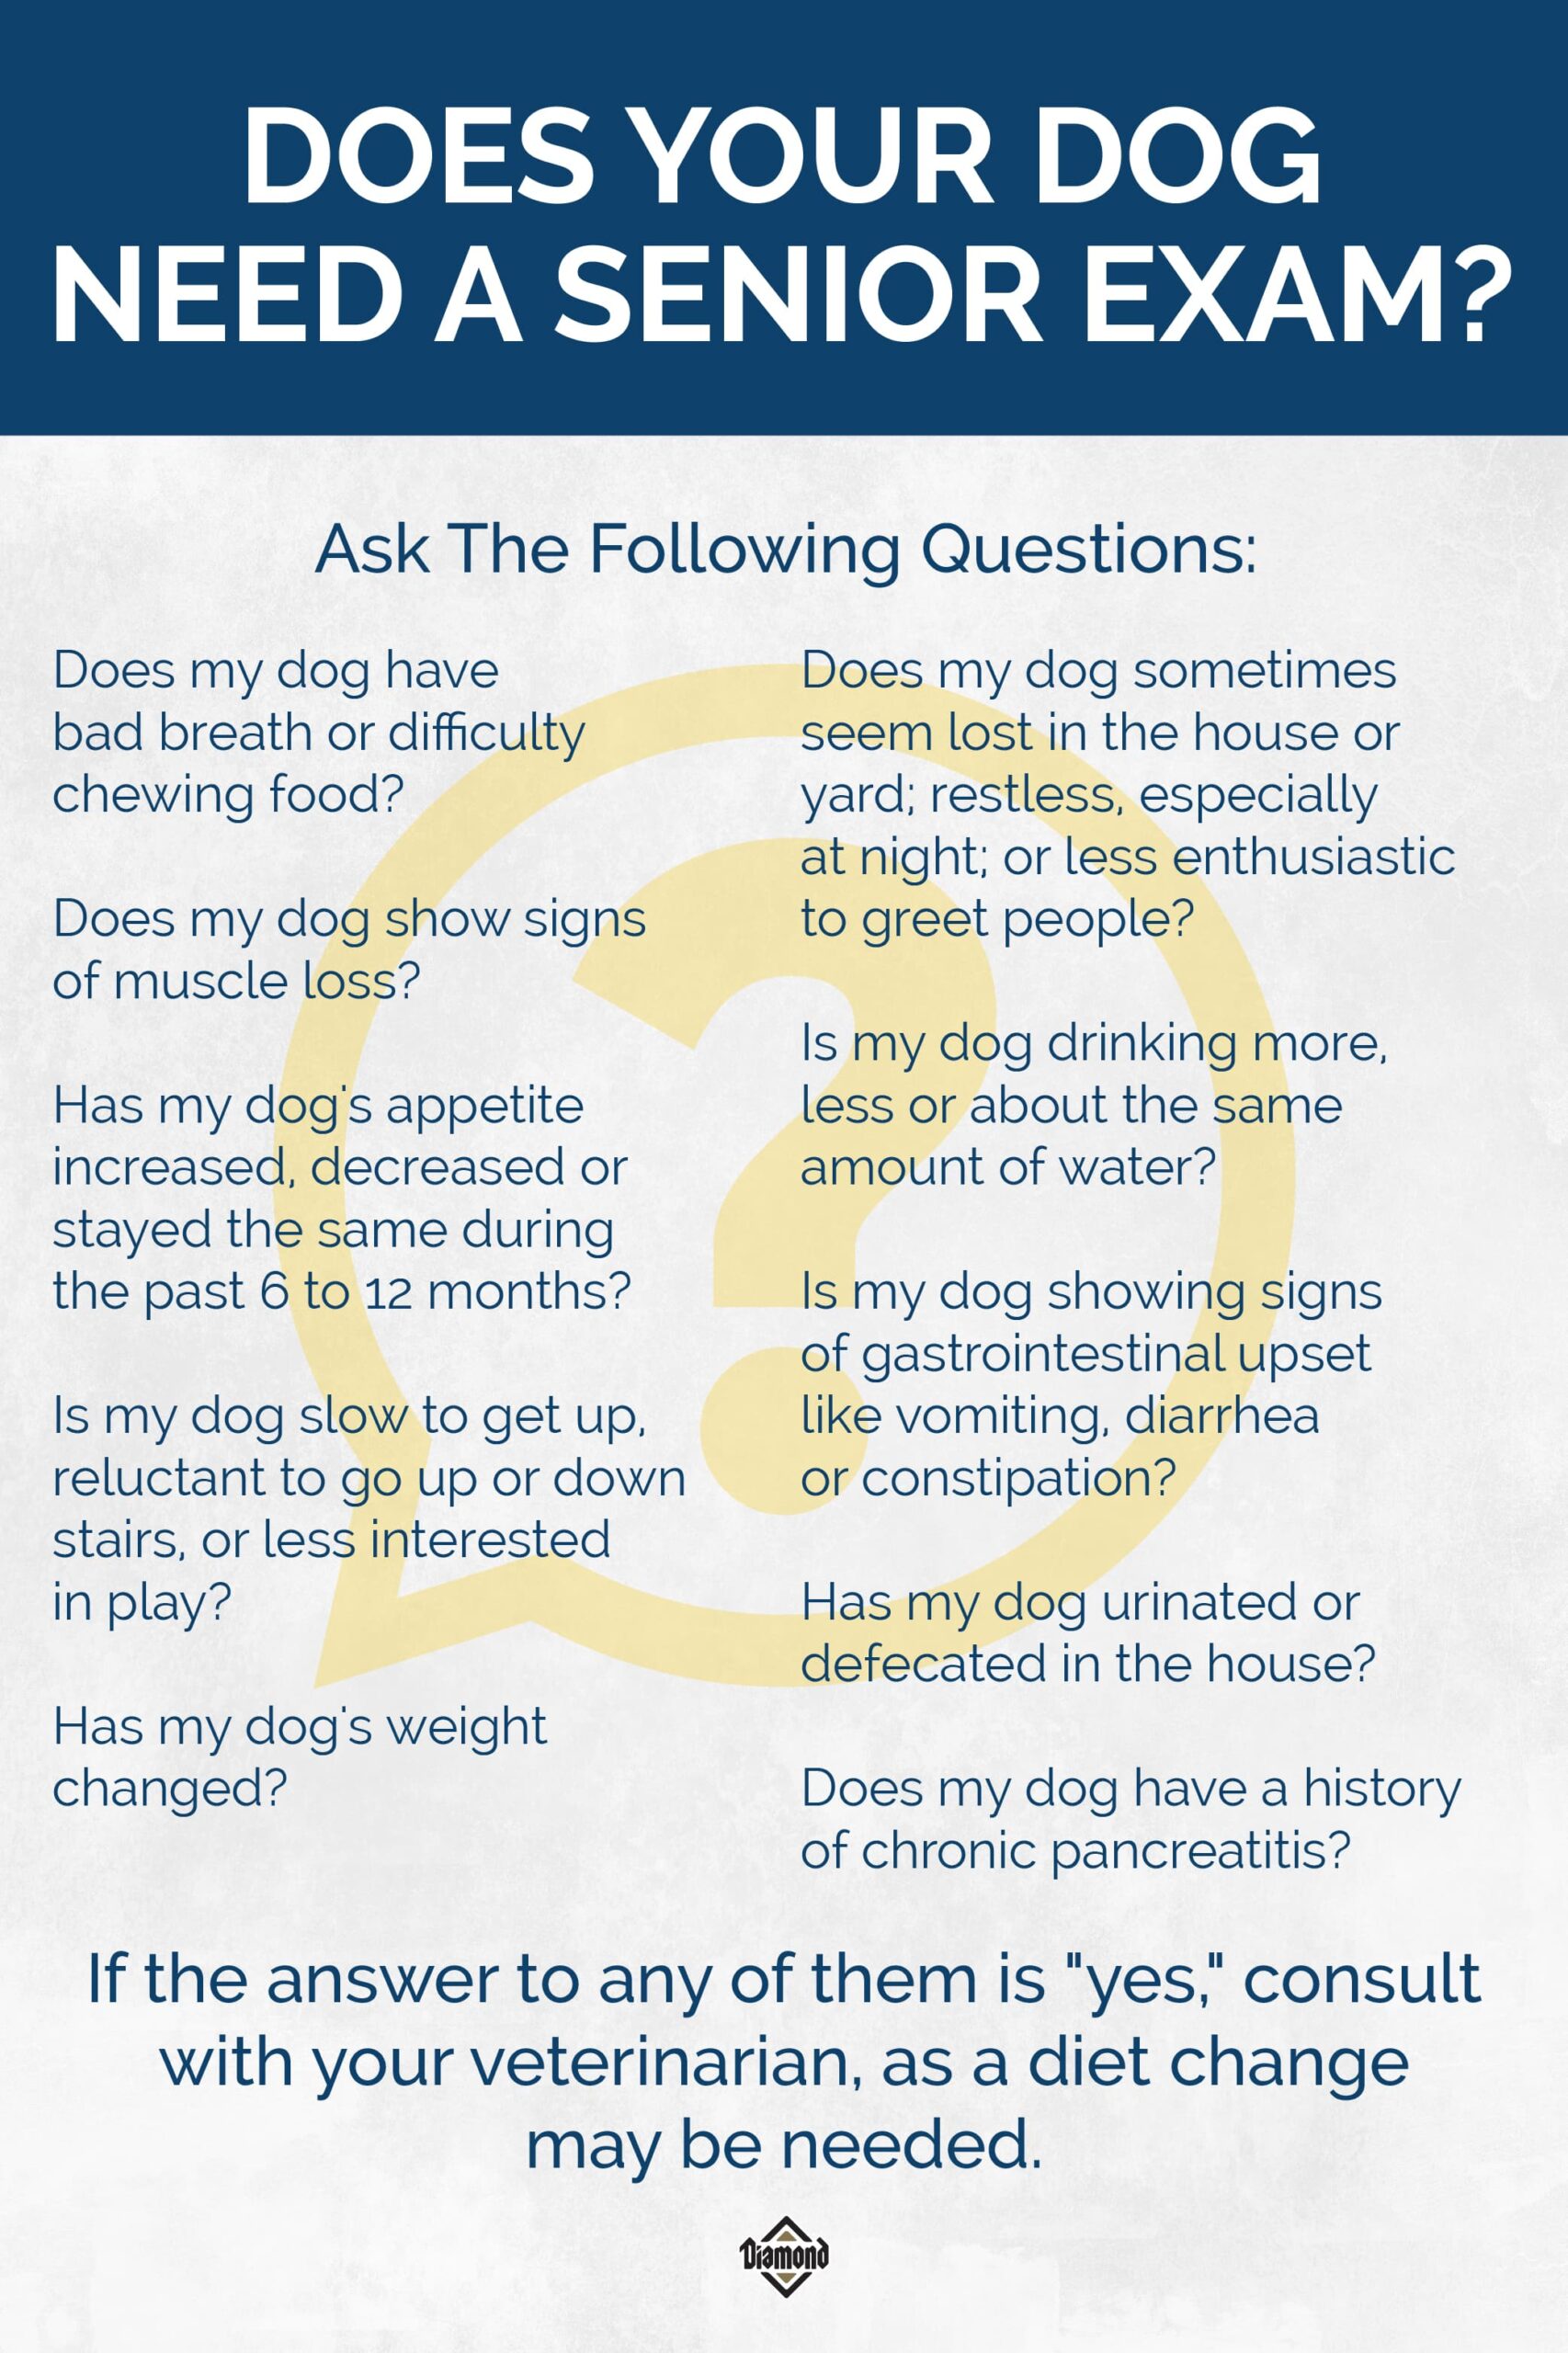 Does Your Dog Need a Senior Exam Infographic | Diamond Pet Foods